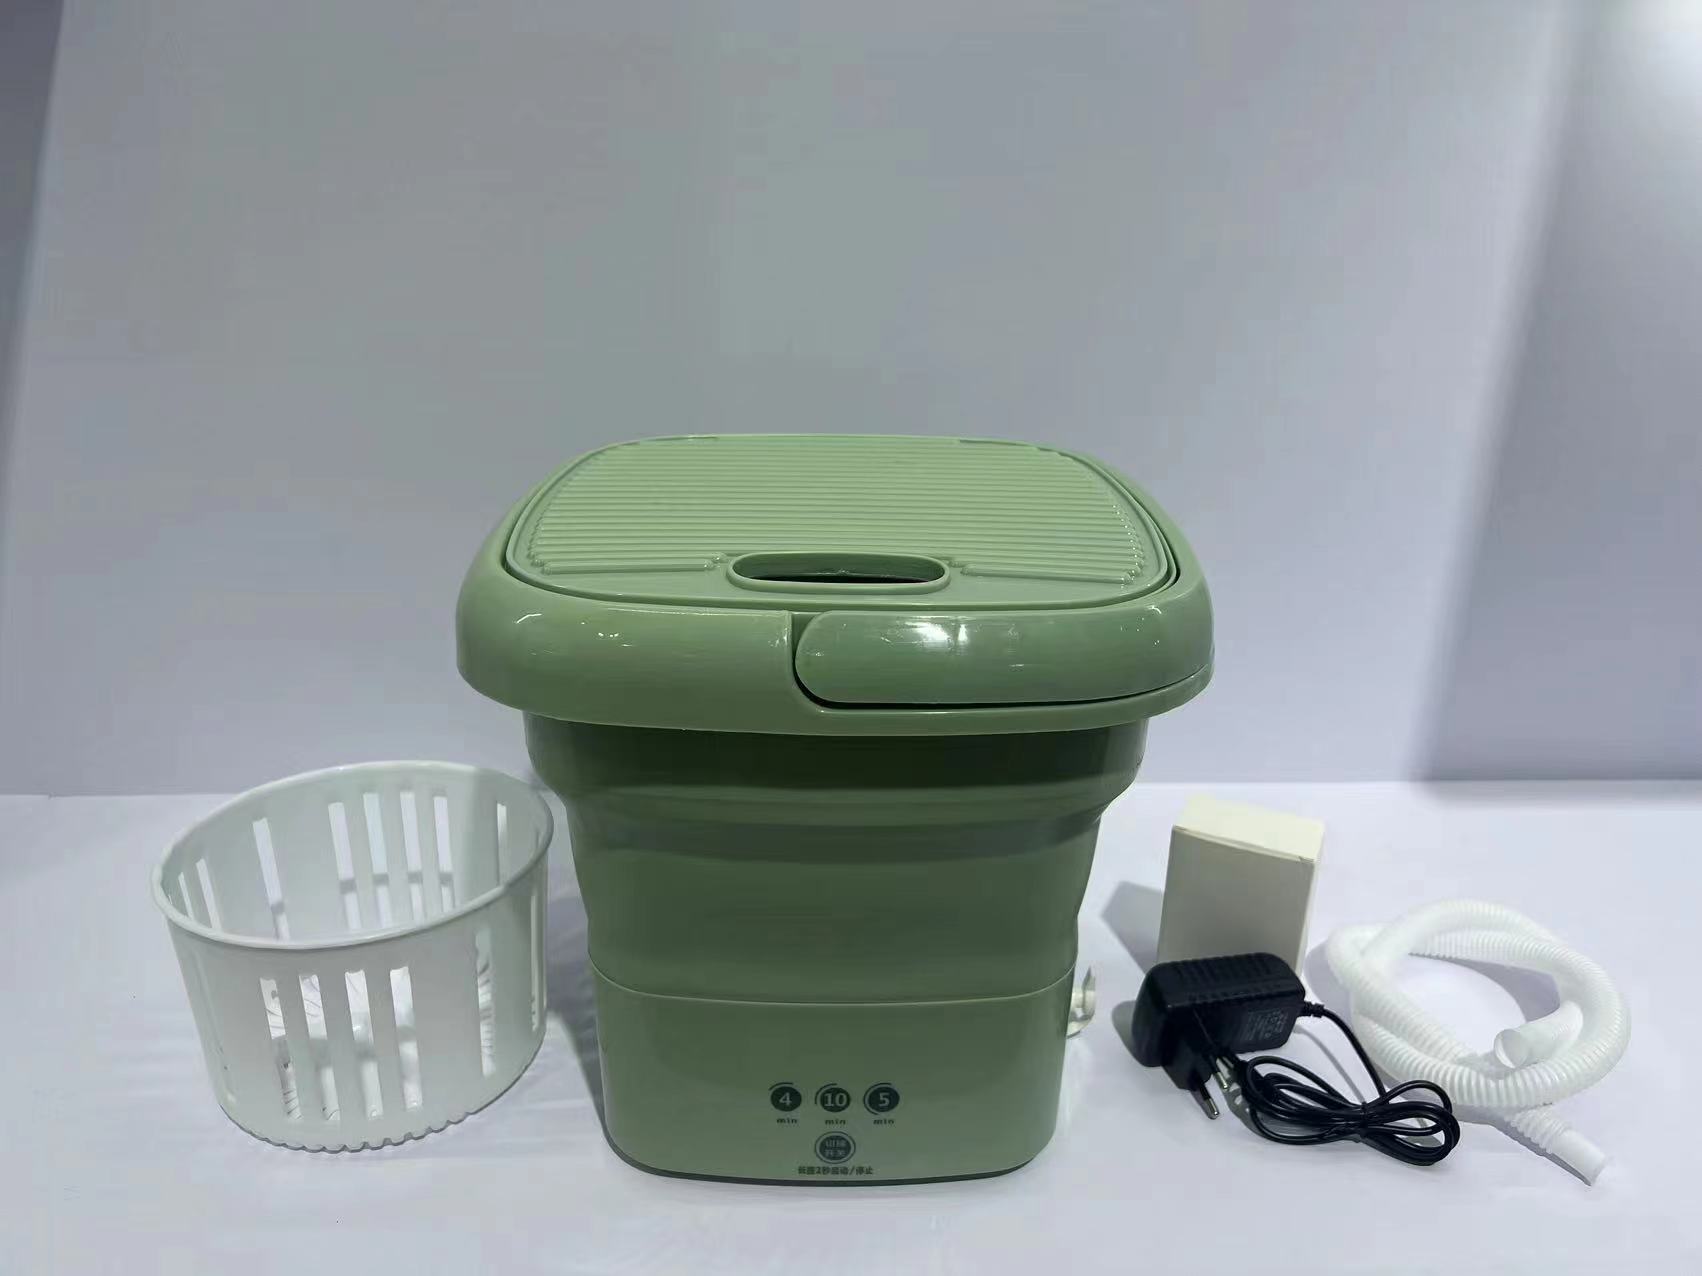 Portable Washing Machine Mini Foldable Washer with Spin Dryer Bucket for  Baby Clothes,Underwear,Socks,Towels Perfect for  Travel,Apartment,Lightweight